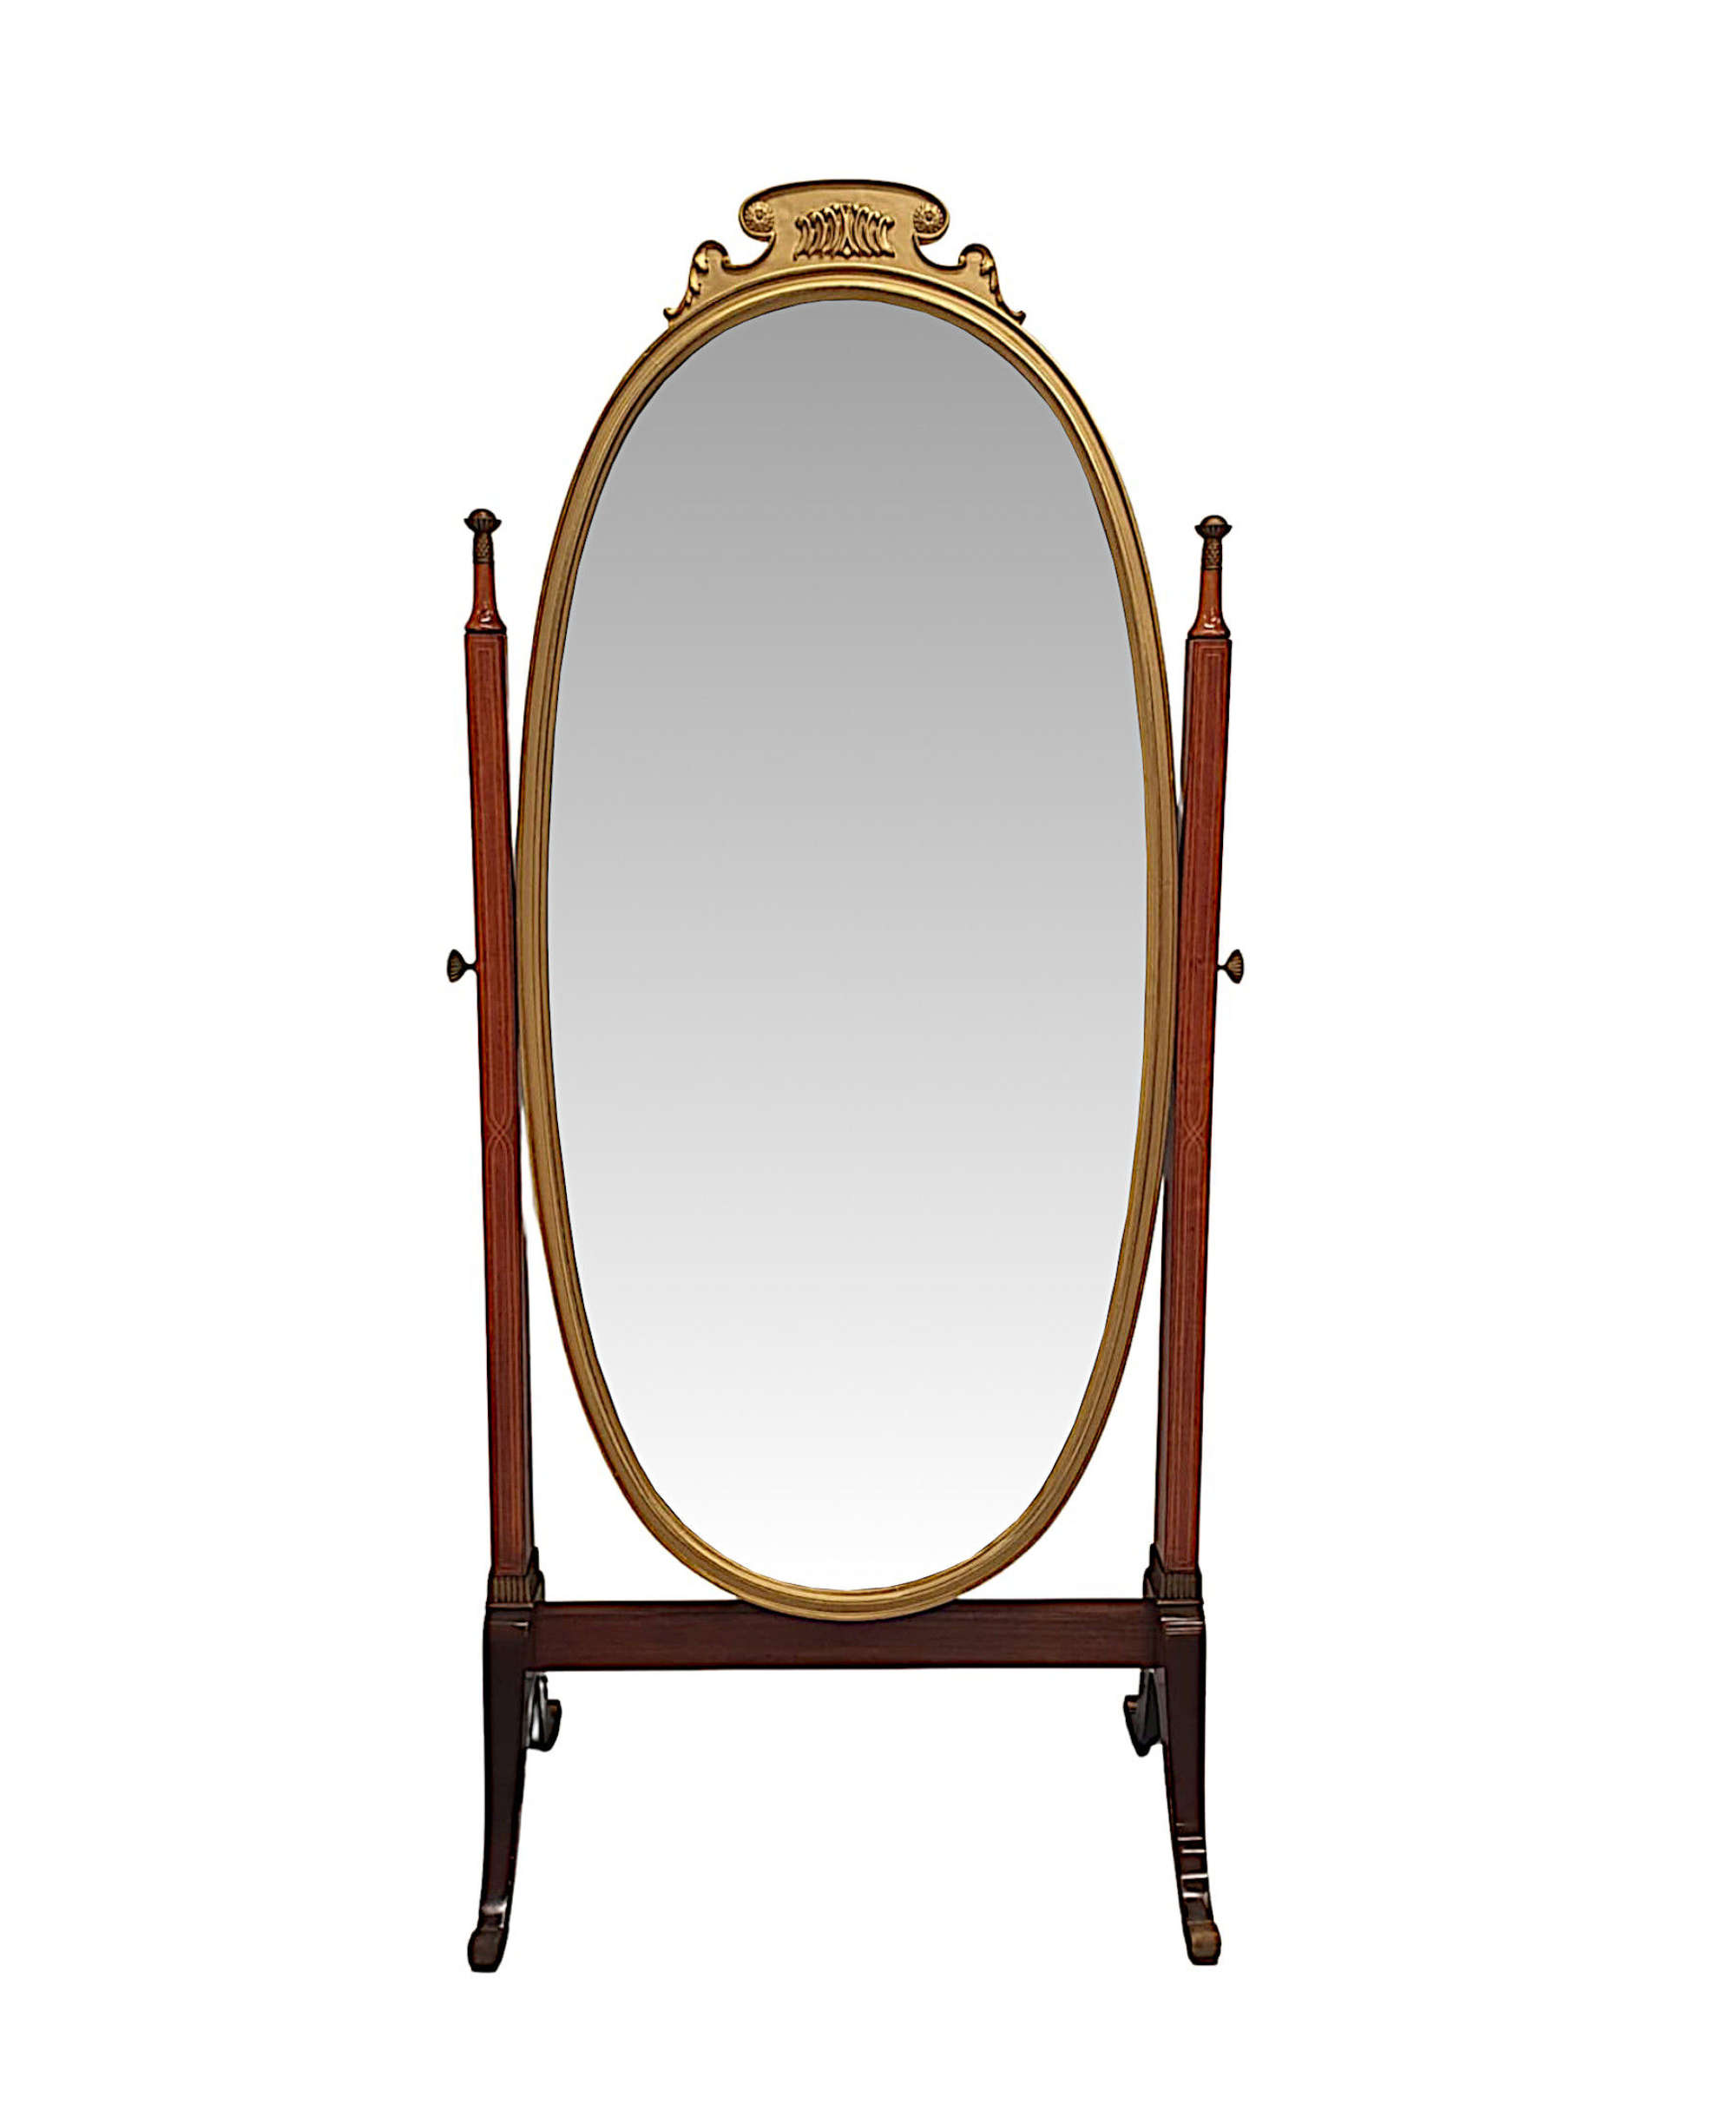 A Very Fine and Unusual Edwardian Rosewood and Giltwood Cheval Mirror